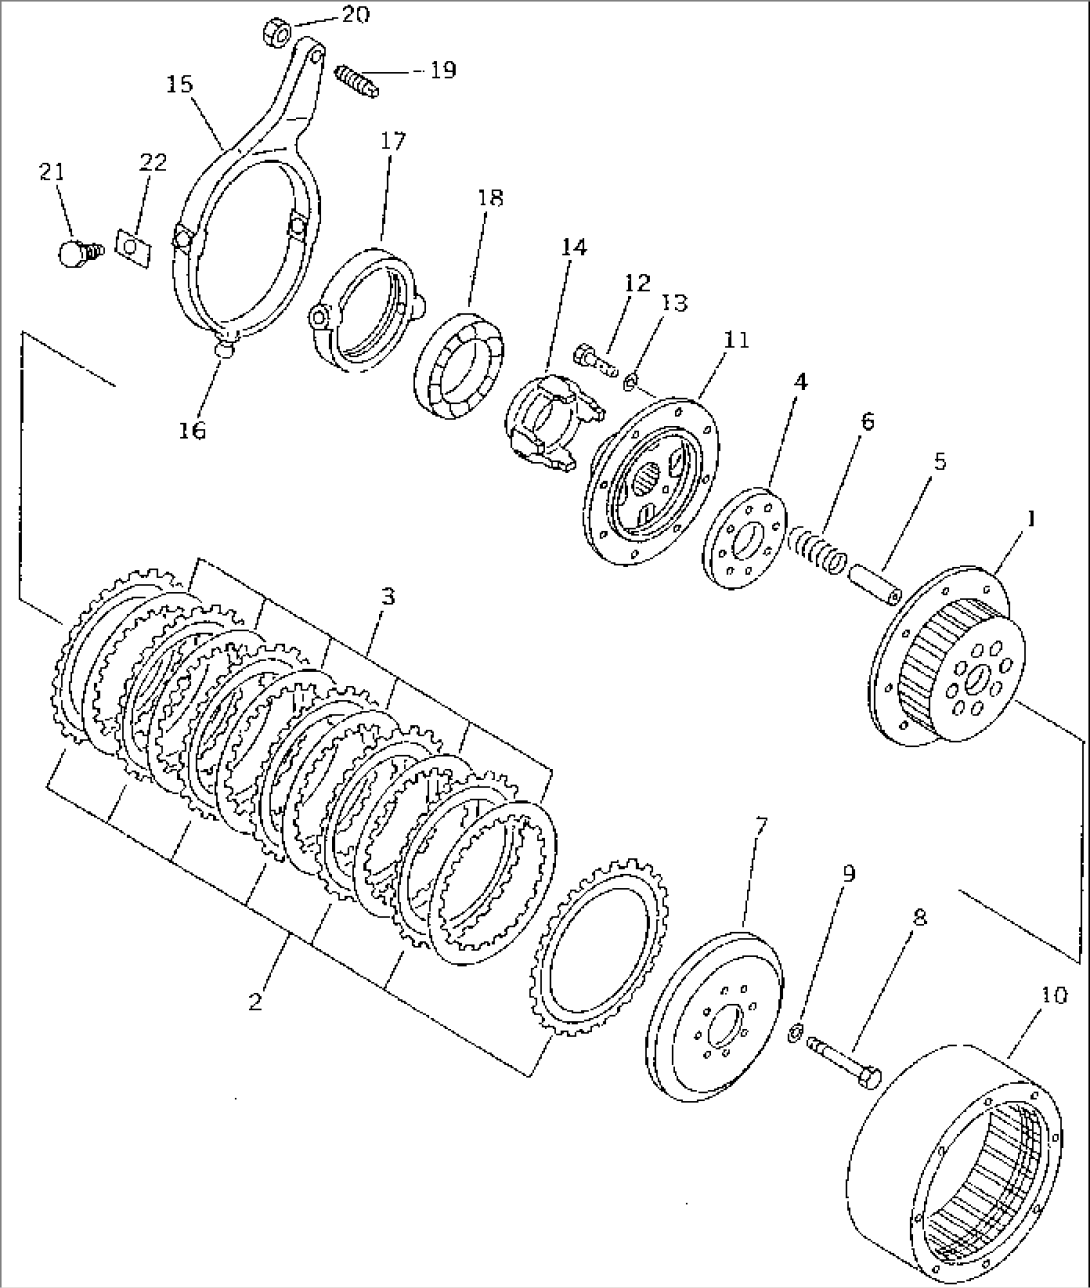 STEERING CLUTCH (FOR SHIP